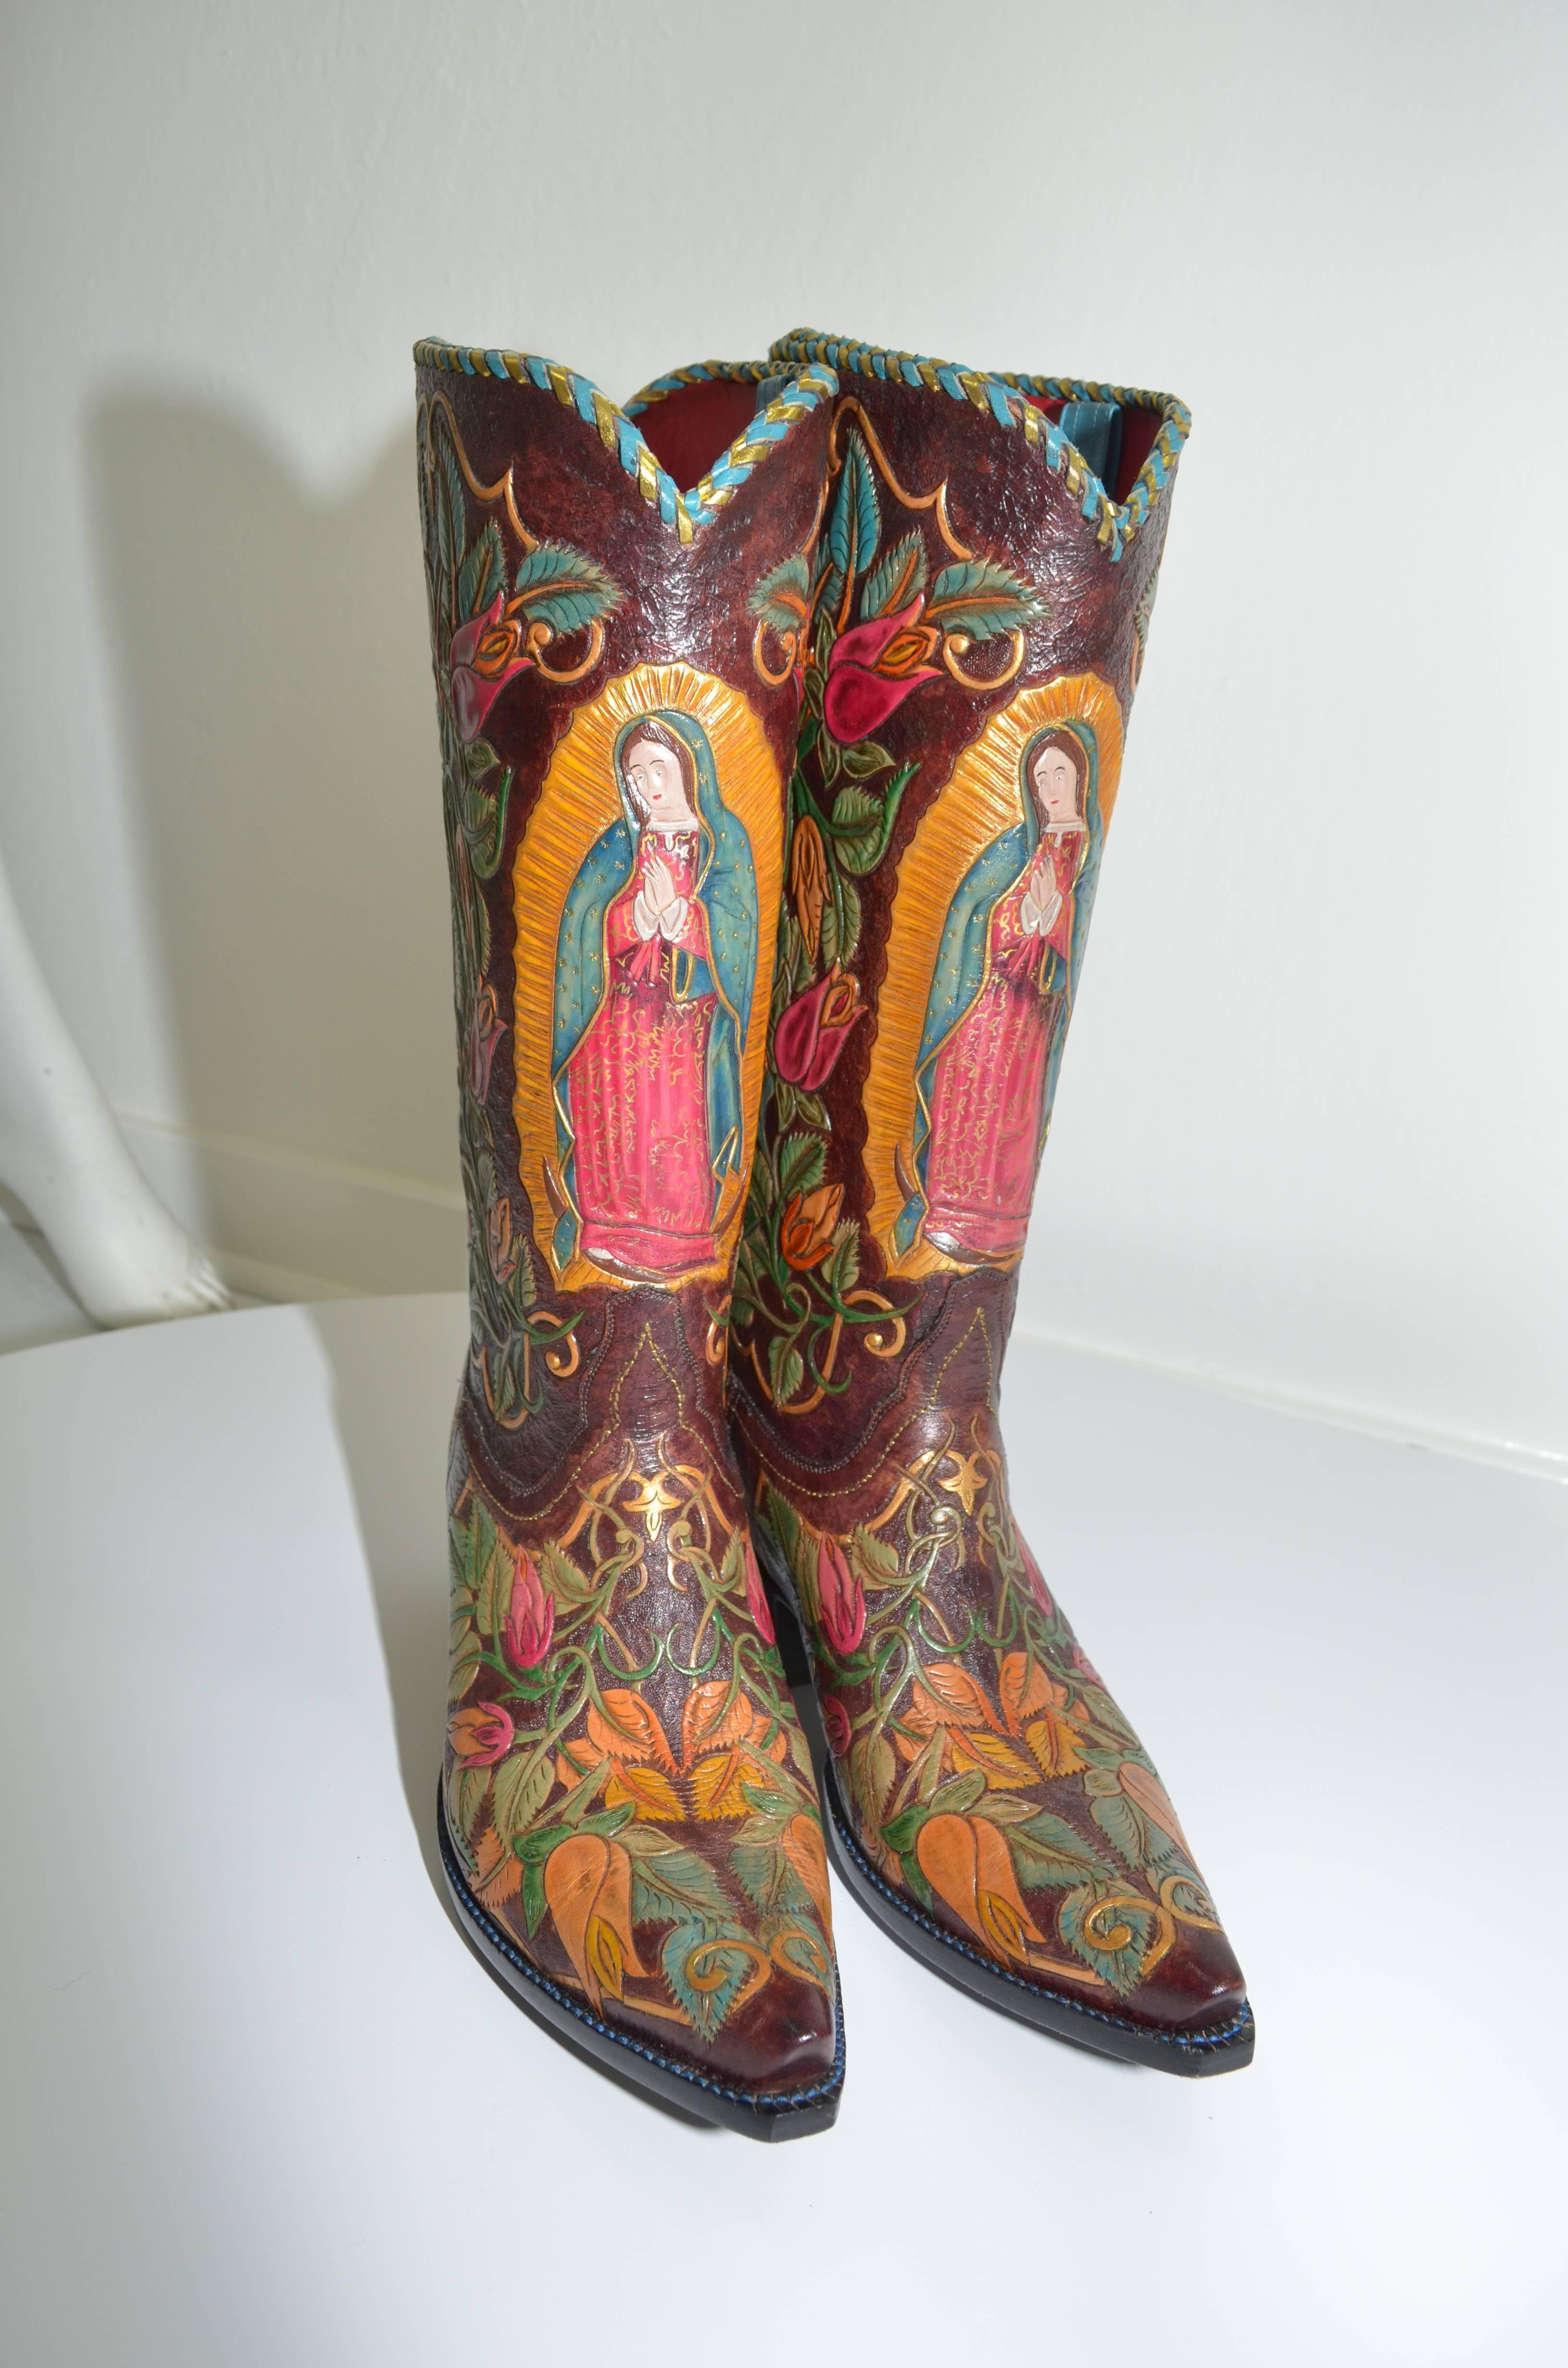 Very rare 40 Rosas Nuestra Señora de Guadalupe couture custom cowboy boots from bespoke custom bookmakers Tres Outlaws. Boots are hand braided, hand tooled, hand painted and take over 400 hours for a craftsman to make. Boots are signed by the maker